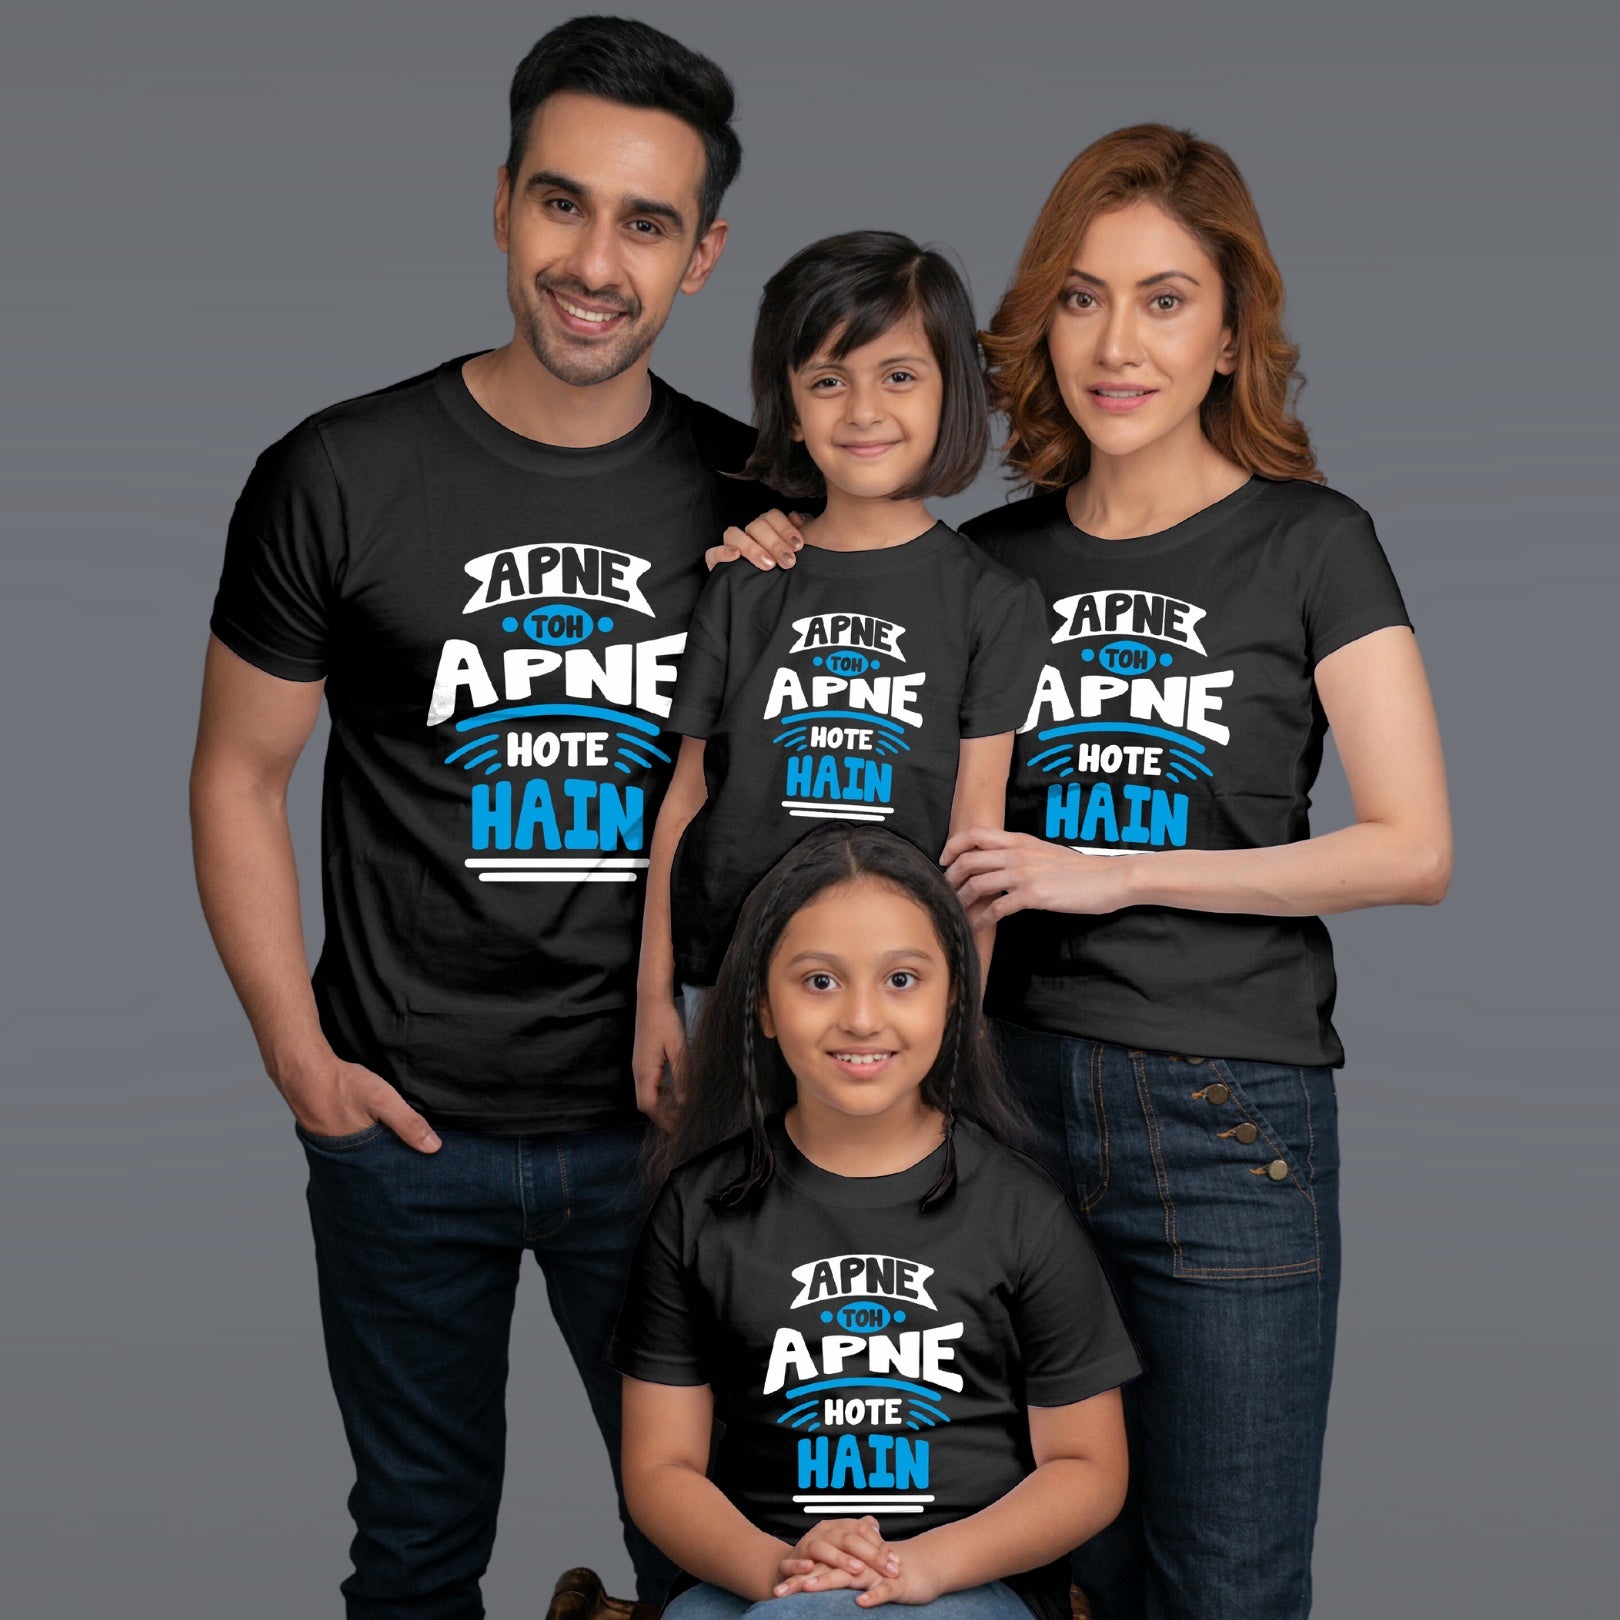 Family t shirts set of 4 Mom Dad Two Daughters in Black Colour - Apne Toh Apne Hote Hain Variant